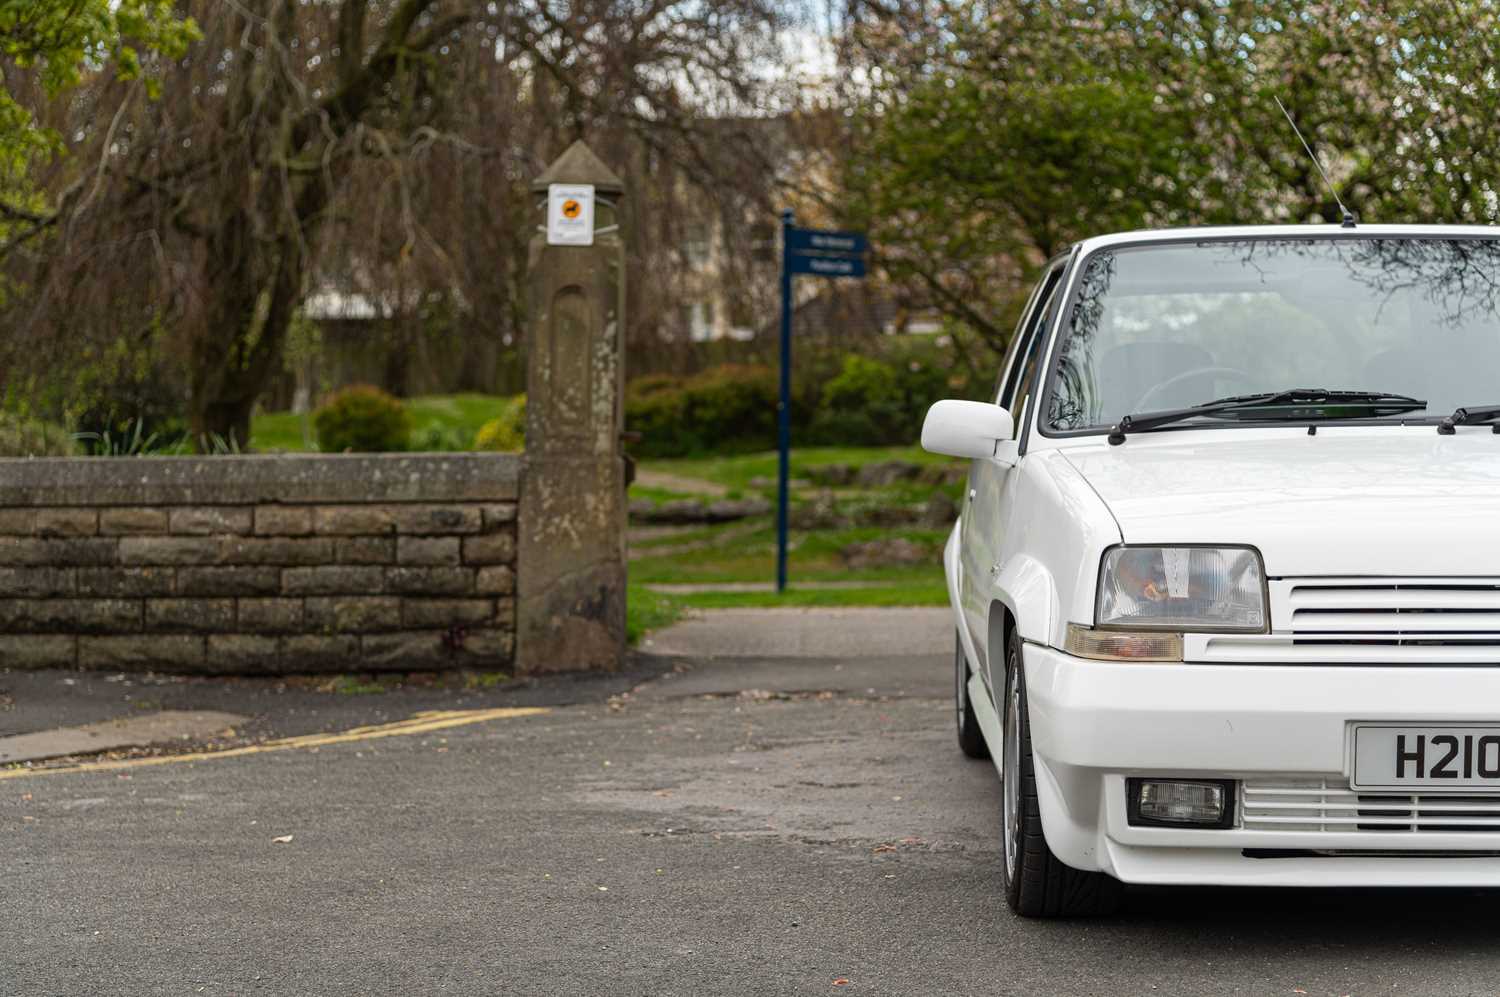 1990 Renault 5 GT Turbo - Image 19 of 79